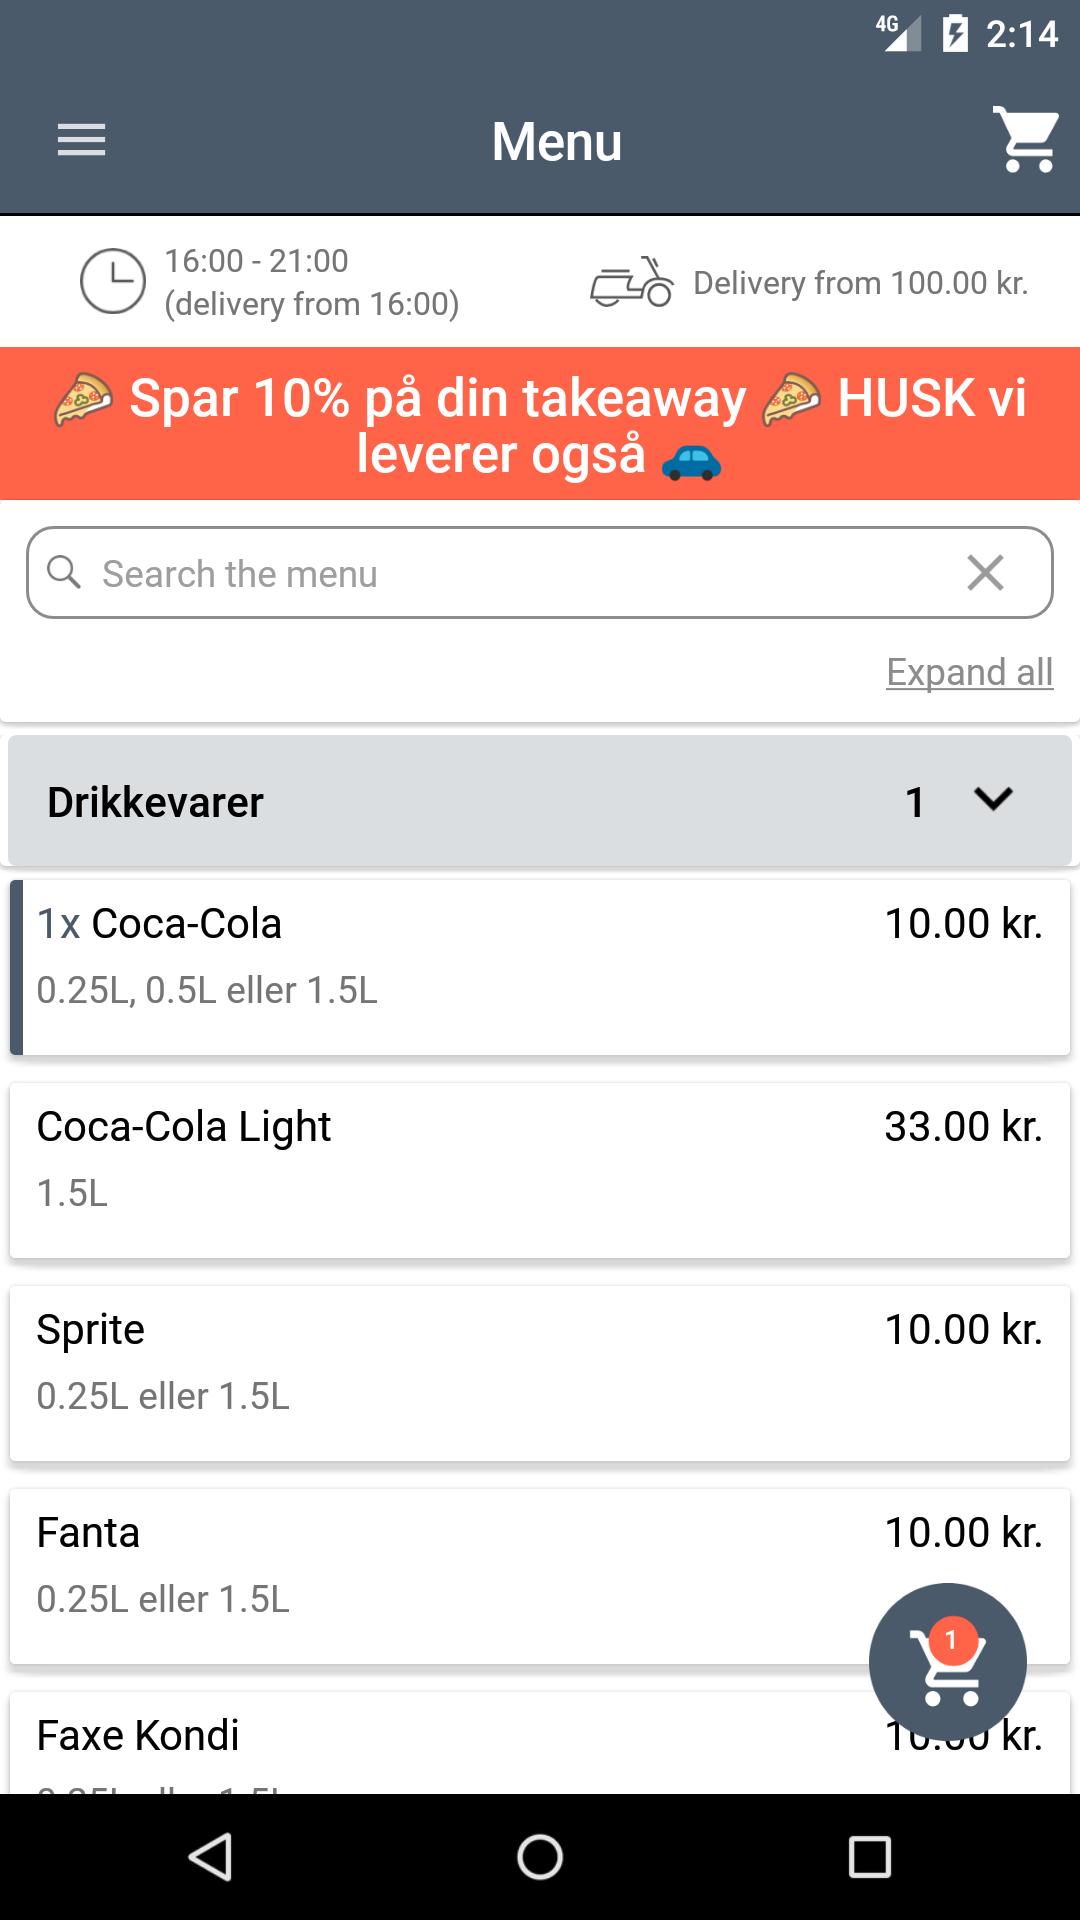 Vestbyens Grill & Pizza 8210 for Android - APK Download